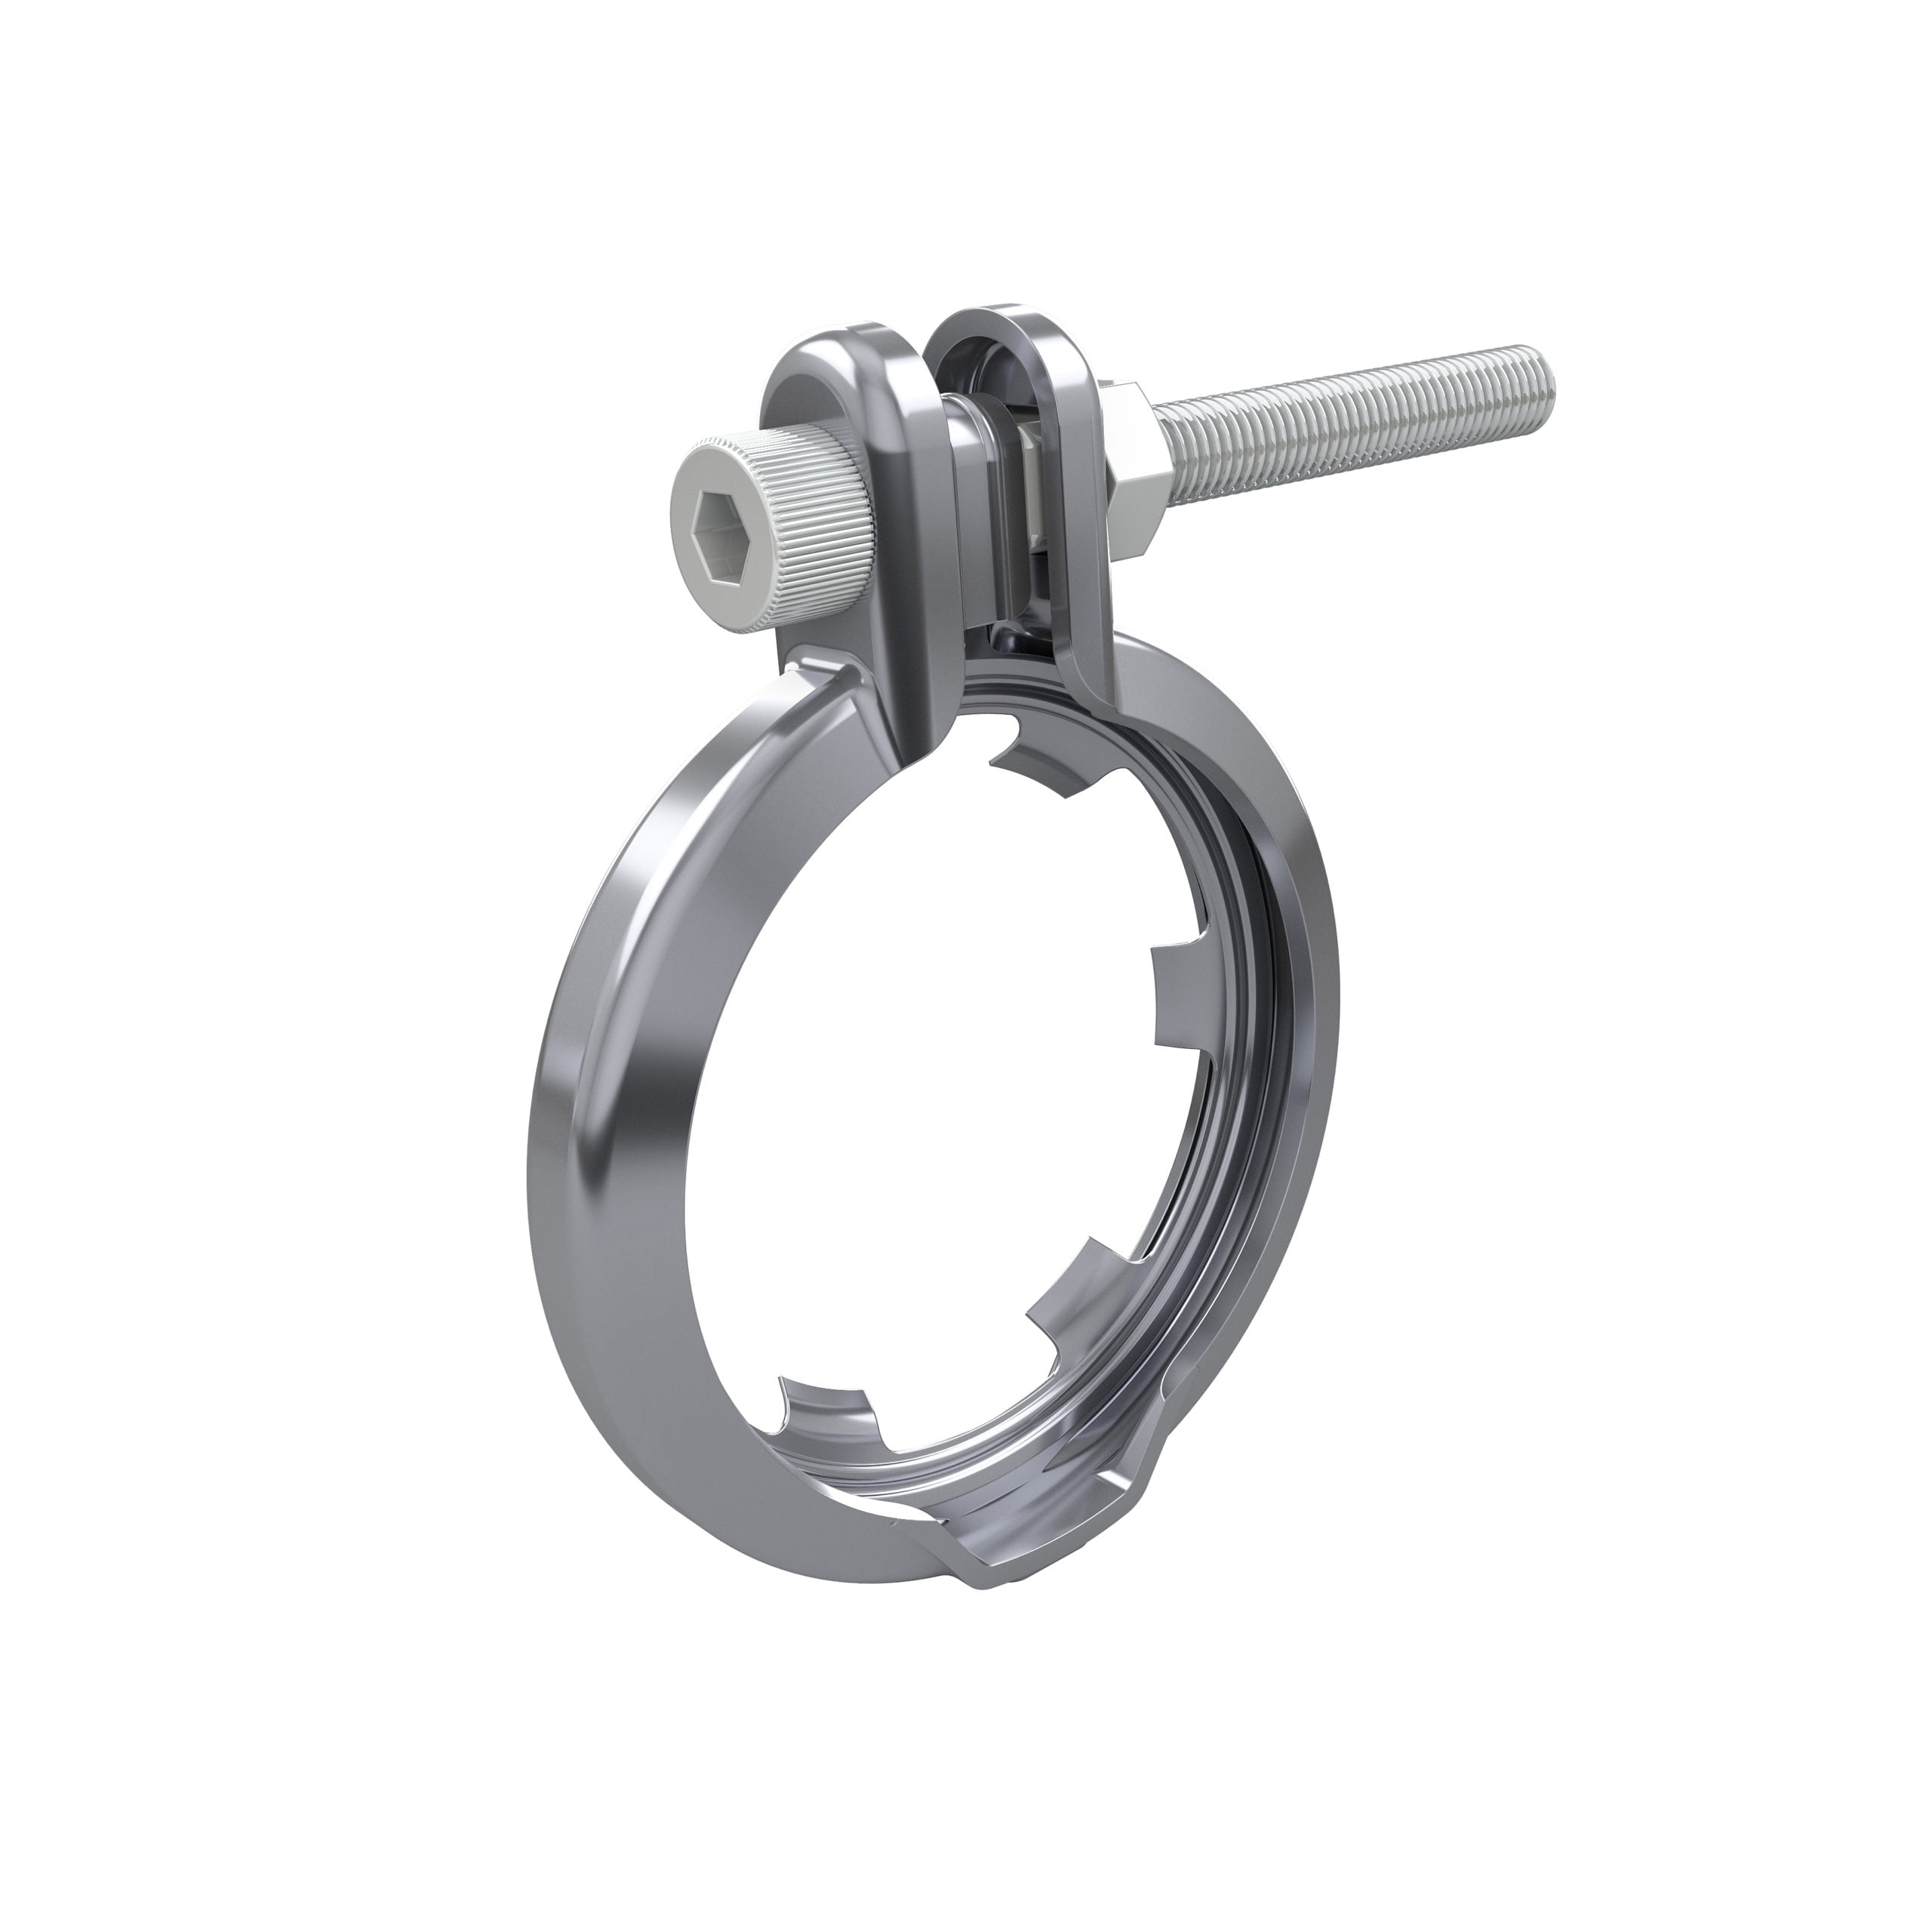 integrated gasket clamp